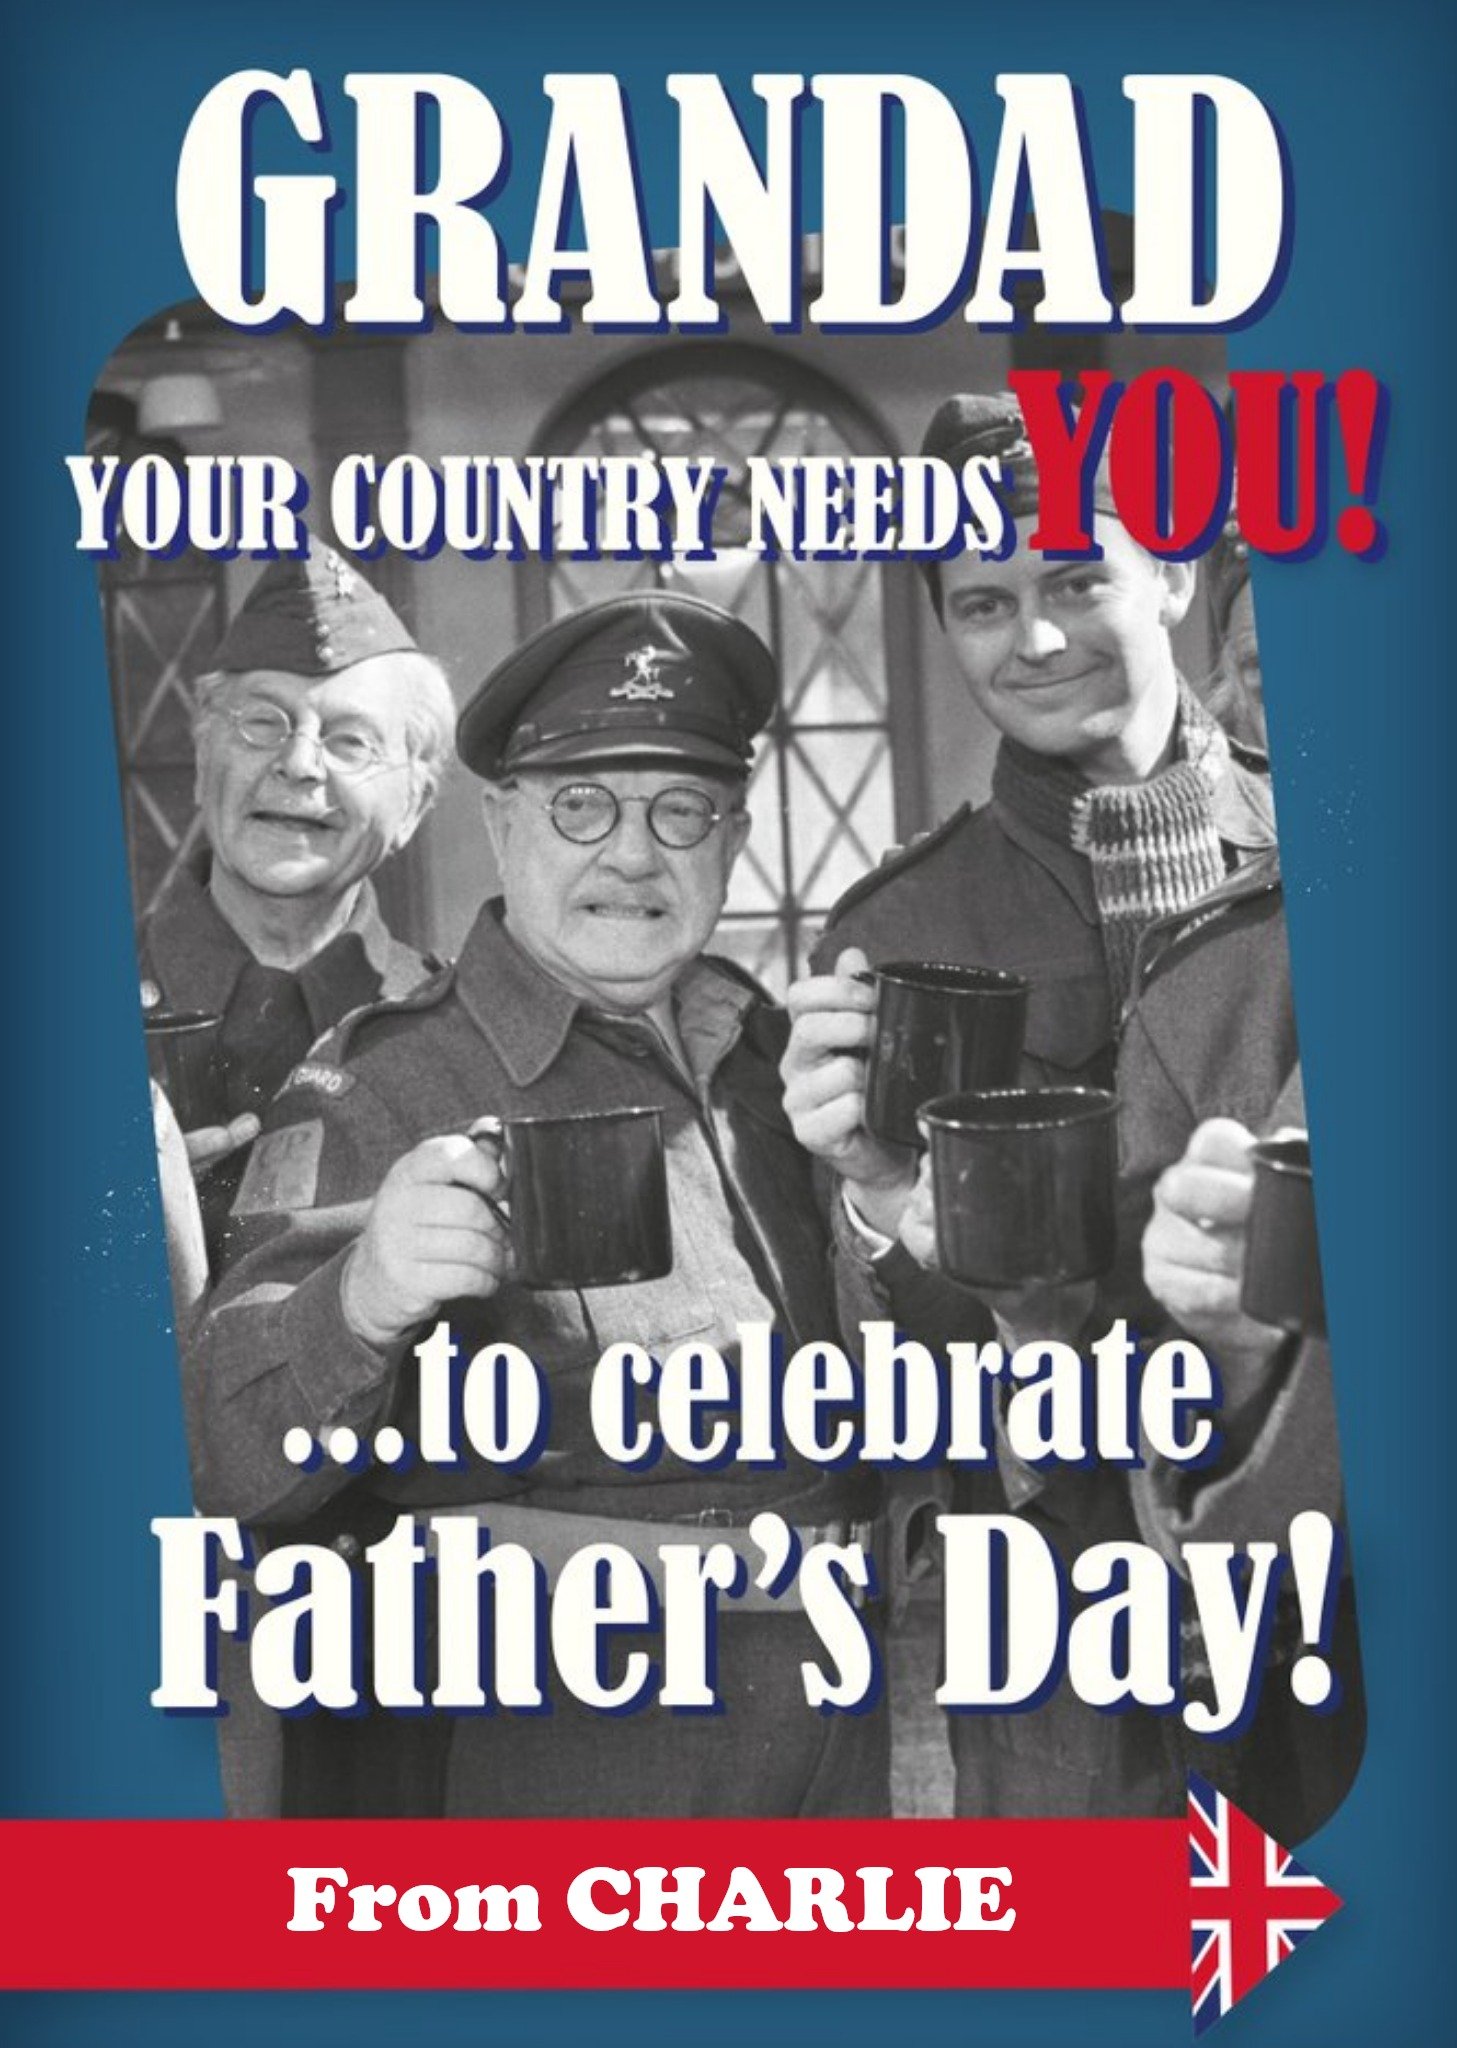 Retro Humour Dad's Army Grandad Your Country Needs You Father's Day Card Ecard